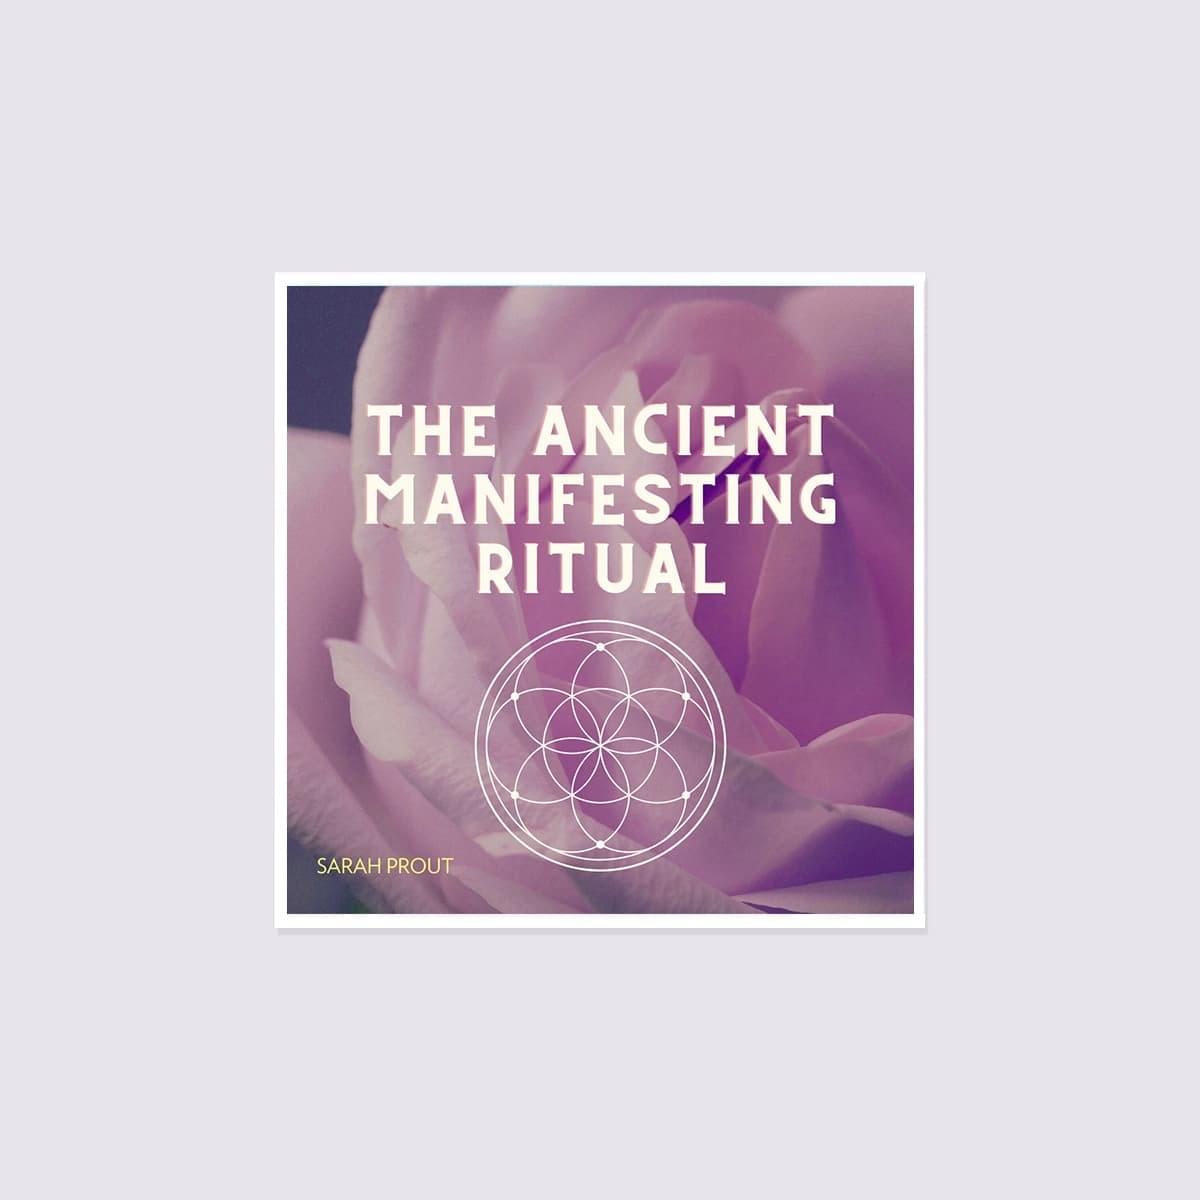 The Ancient Manifesting Ritual